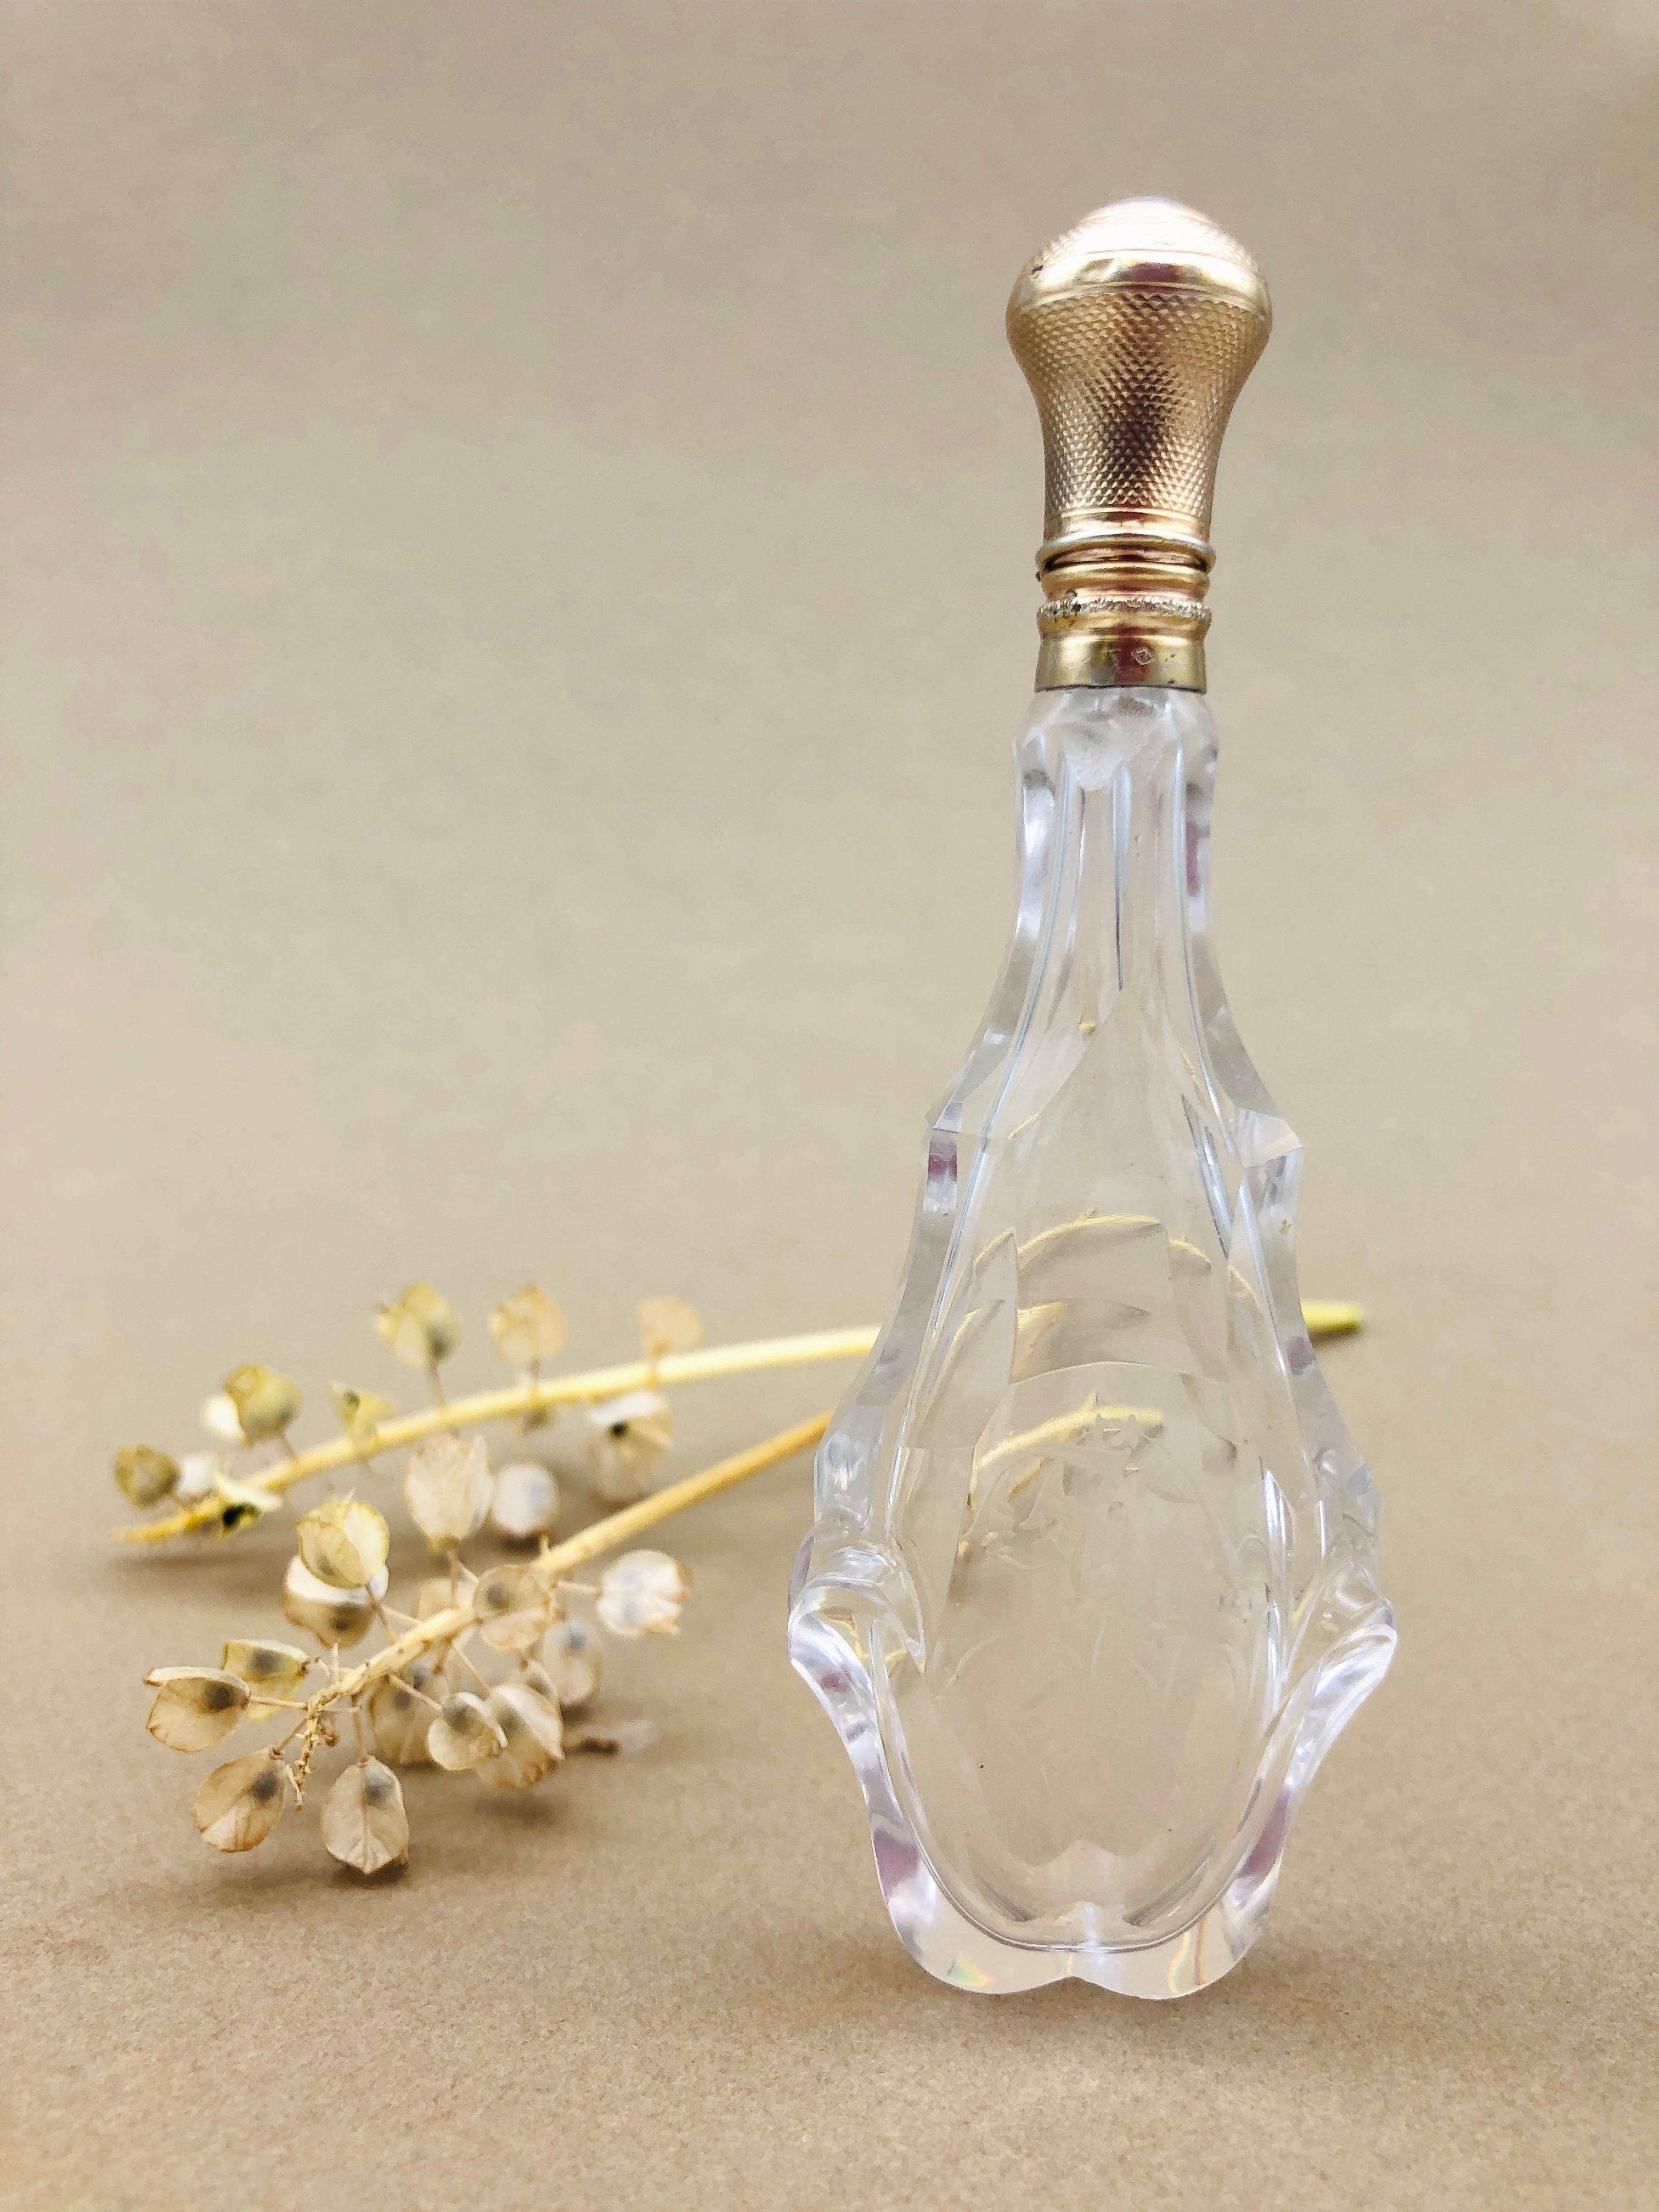 Women's or Men's Crystal Perfume Bottle Charle X Period For Sale